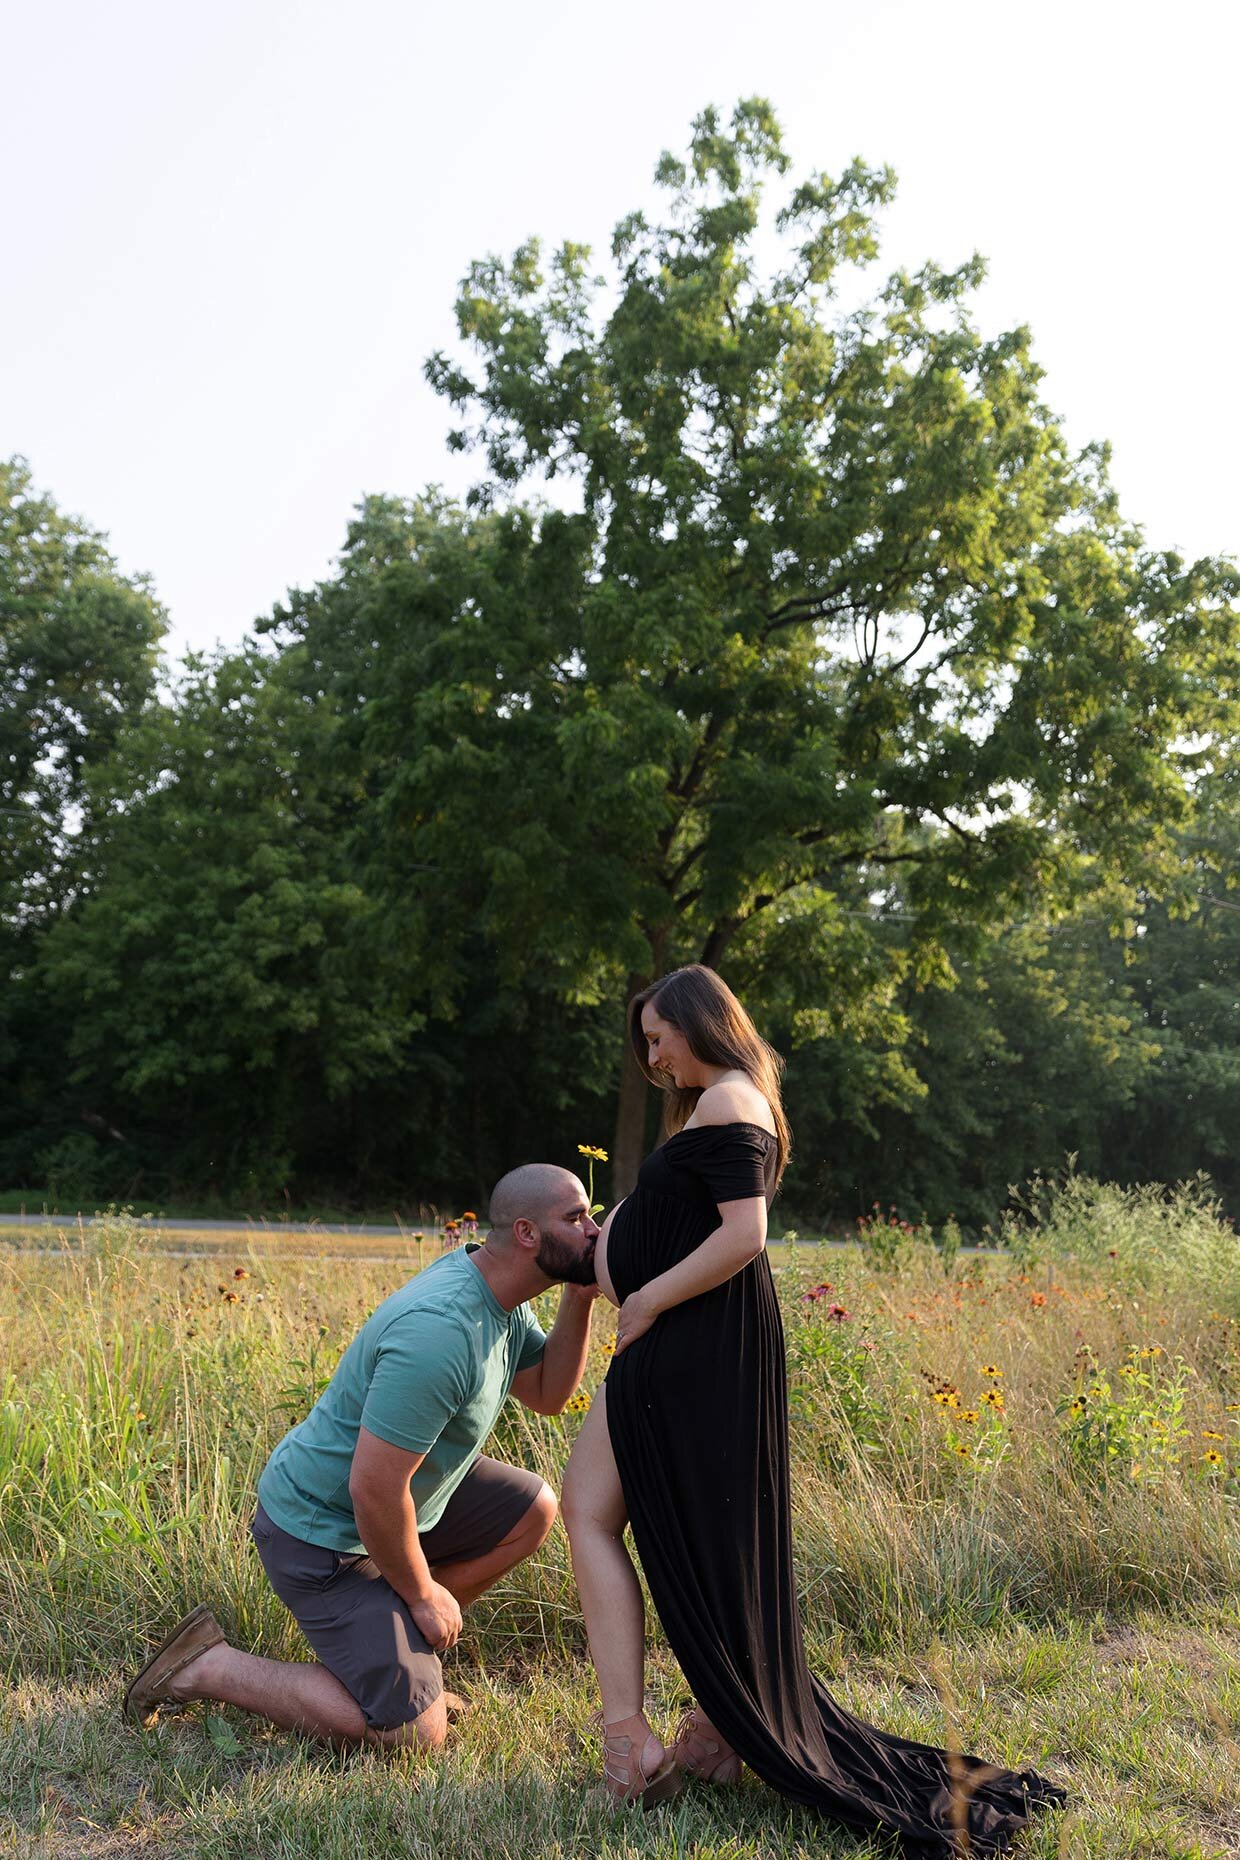 Kissing belly at maternity shoot with a daisy